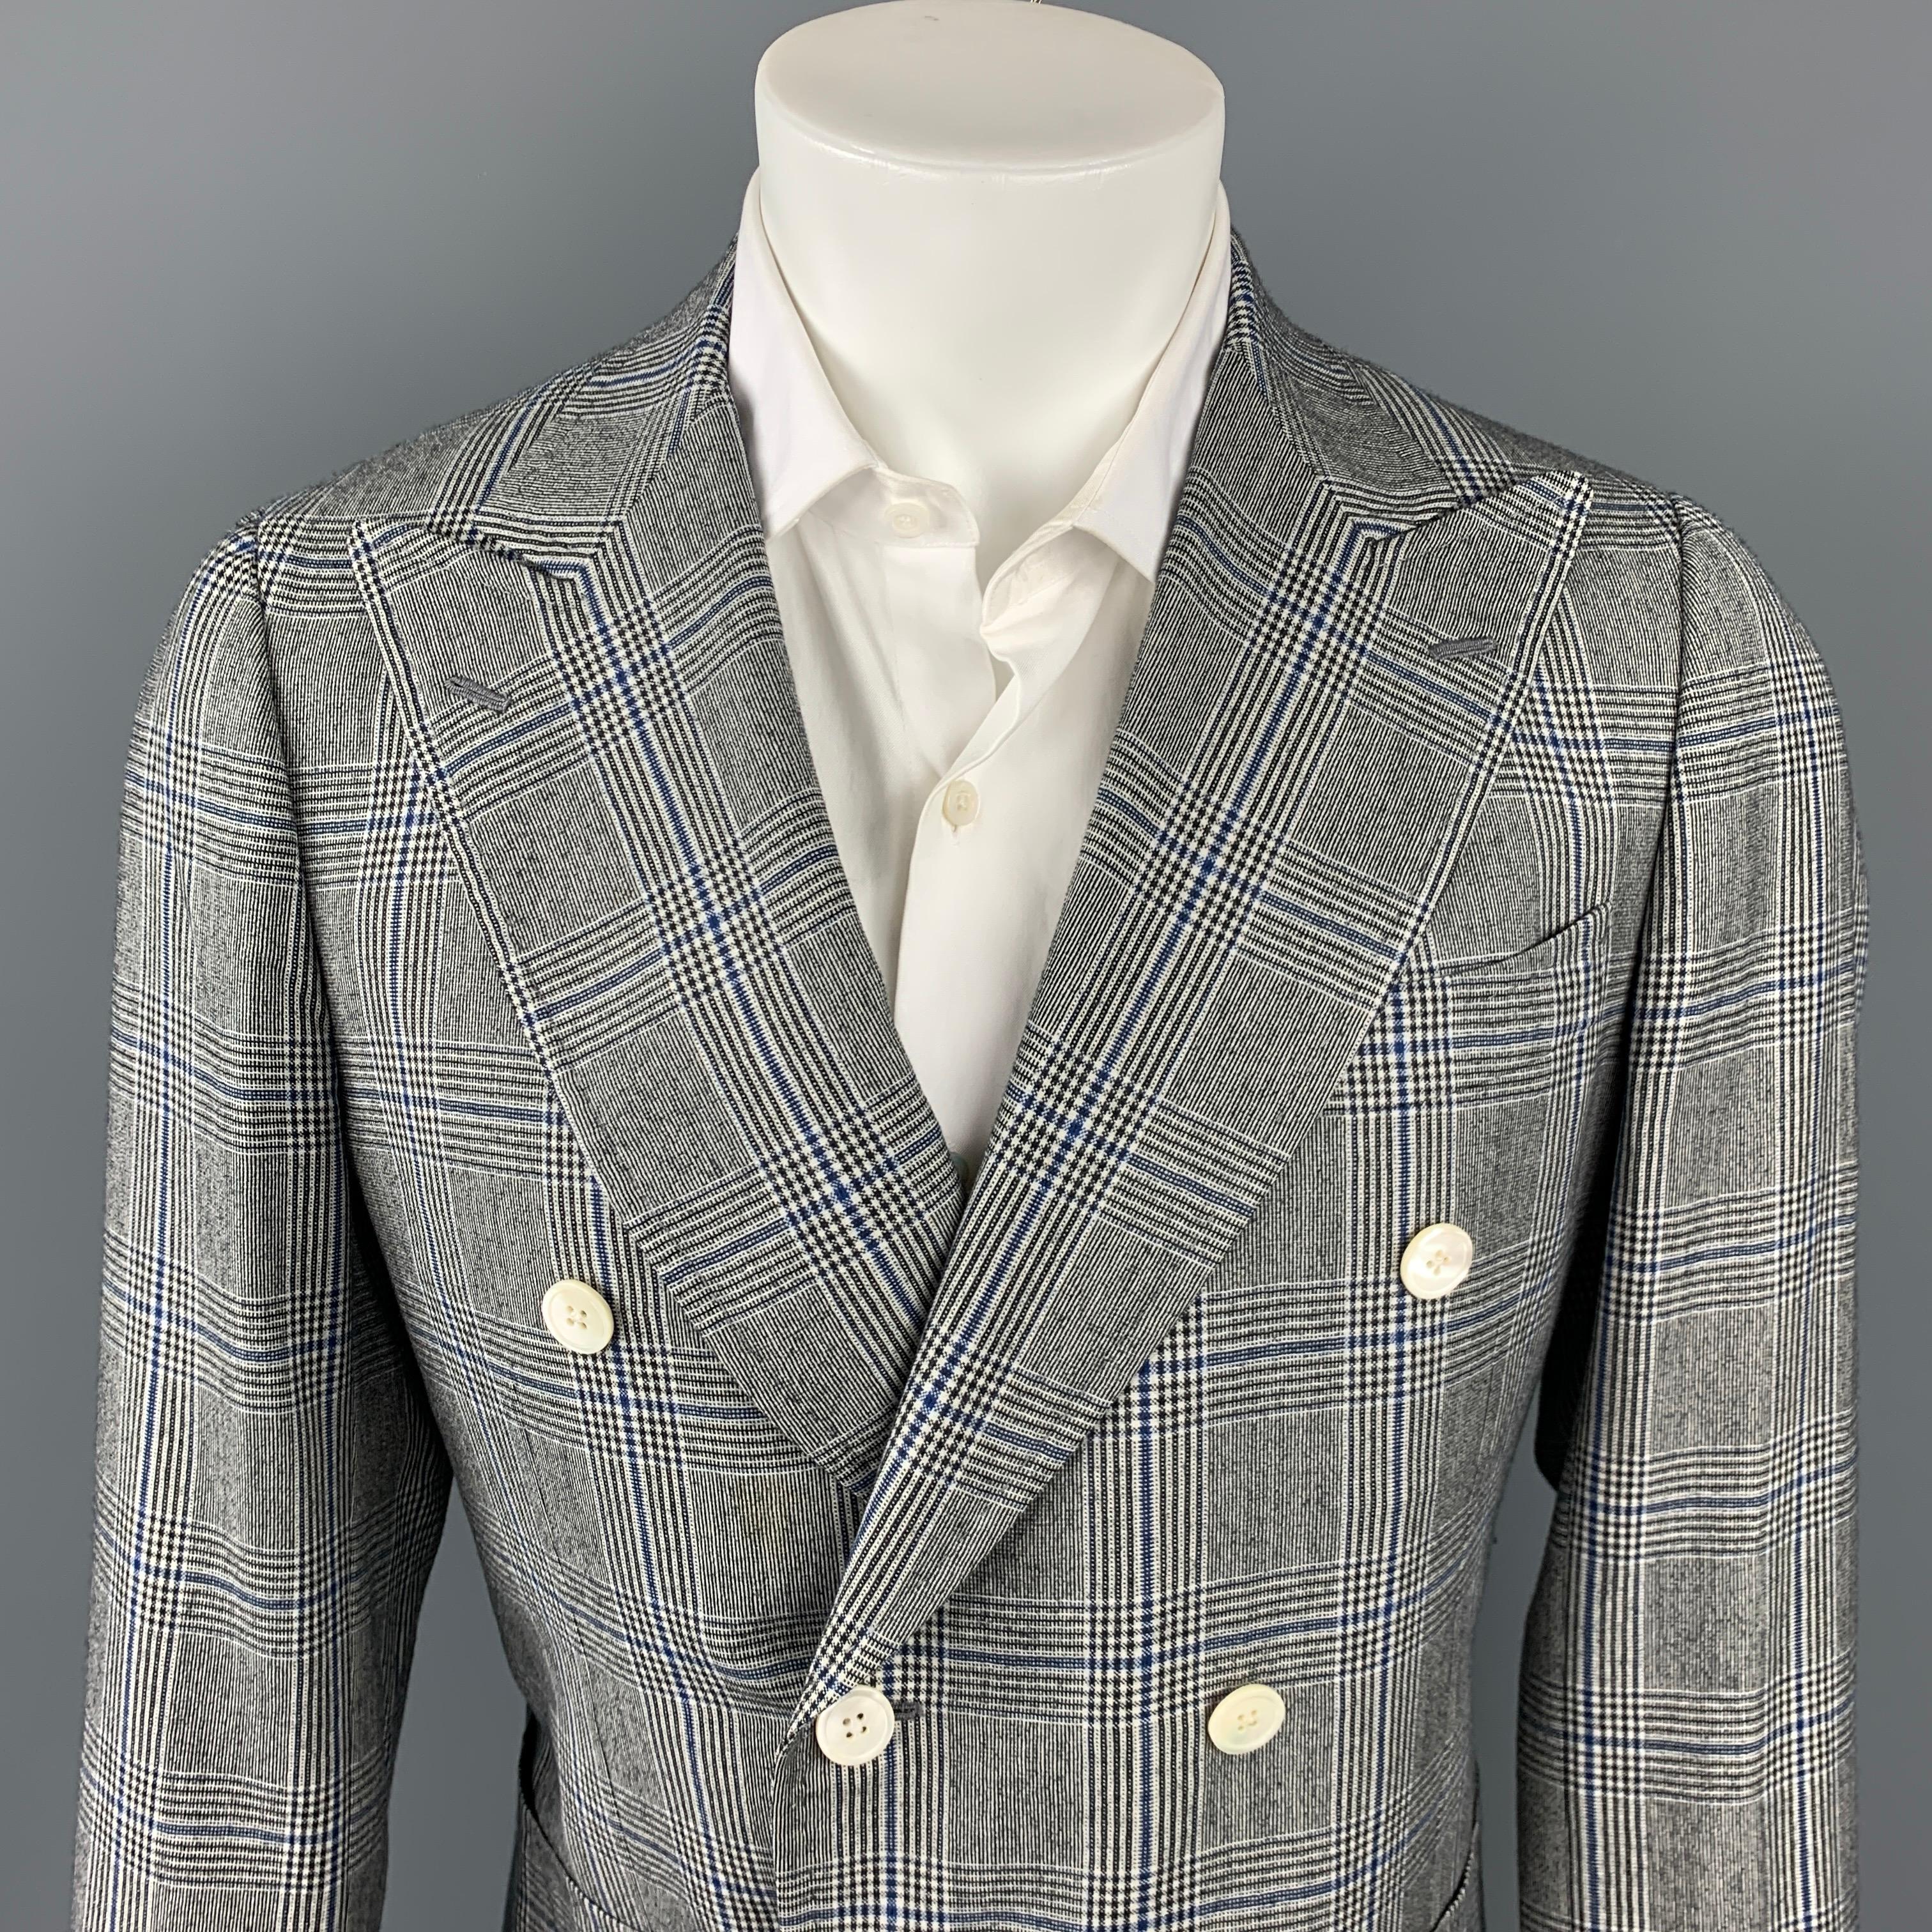 ISAIA sport coat comes in a grey & blue glenplaid wool with a half liner featuring a peak lapel, patch pockets, and a double breasted closure.

Very Good Pre-Owned Condition.
Marked: 48

Measurements:

Shoulder: 16.5 in.
Chest: 38 in.
Sleeve: 25.5